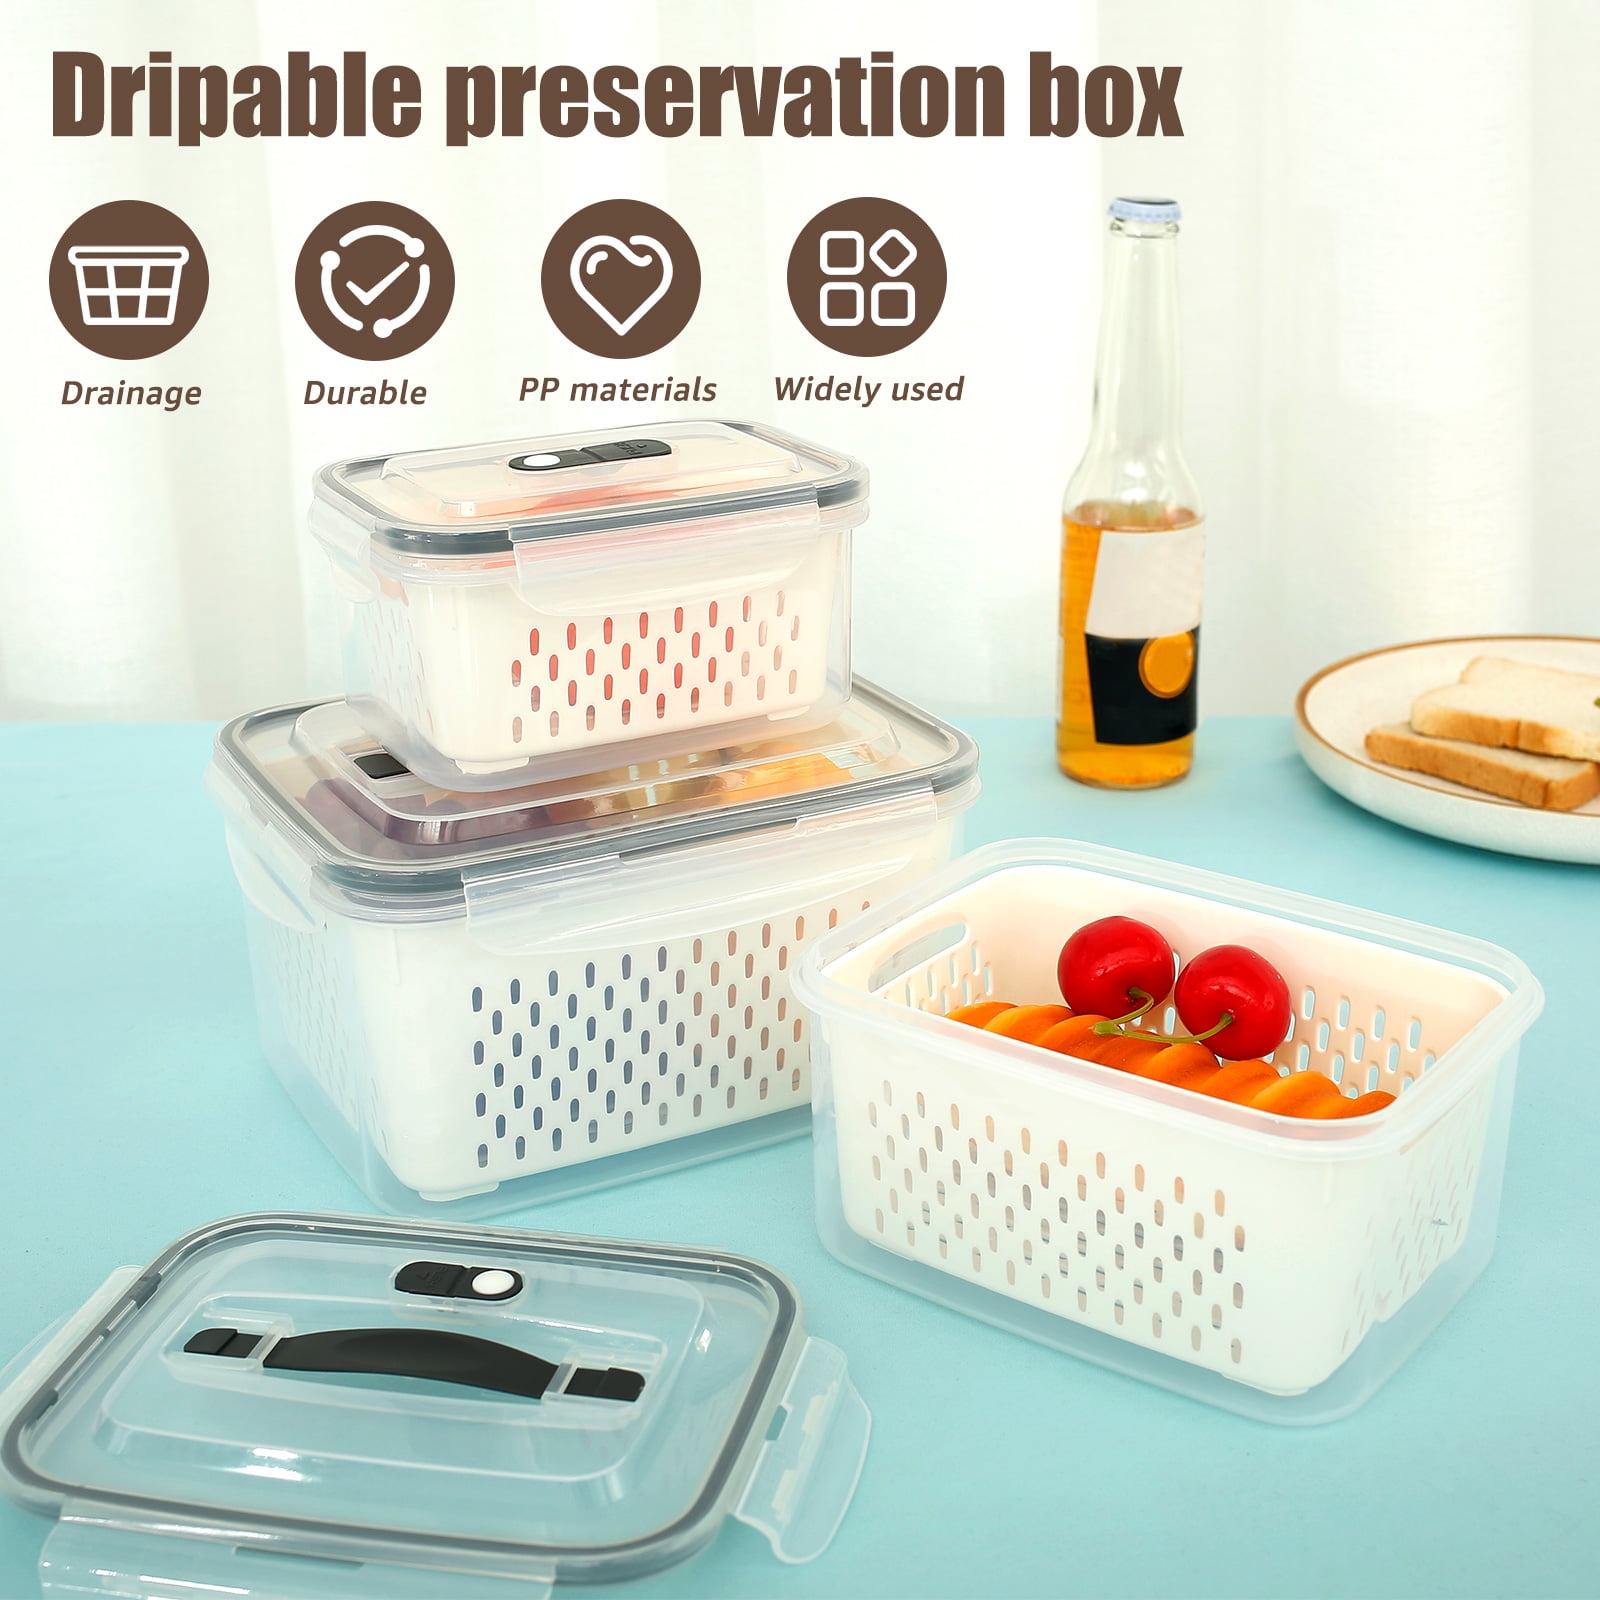 FOOYOO 5 Pcs Fruit Storage Containers for Fridge - Fruit Containers for Refrigerator with Removable Colander - Airtight Food Storage Container Keep Produce